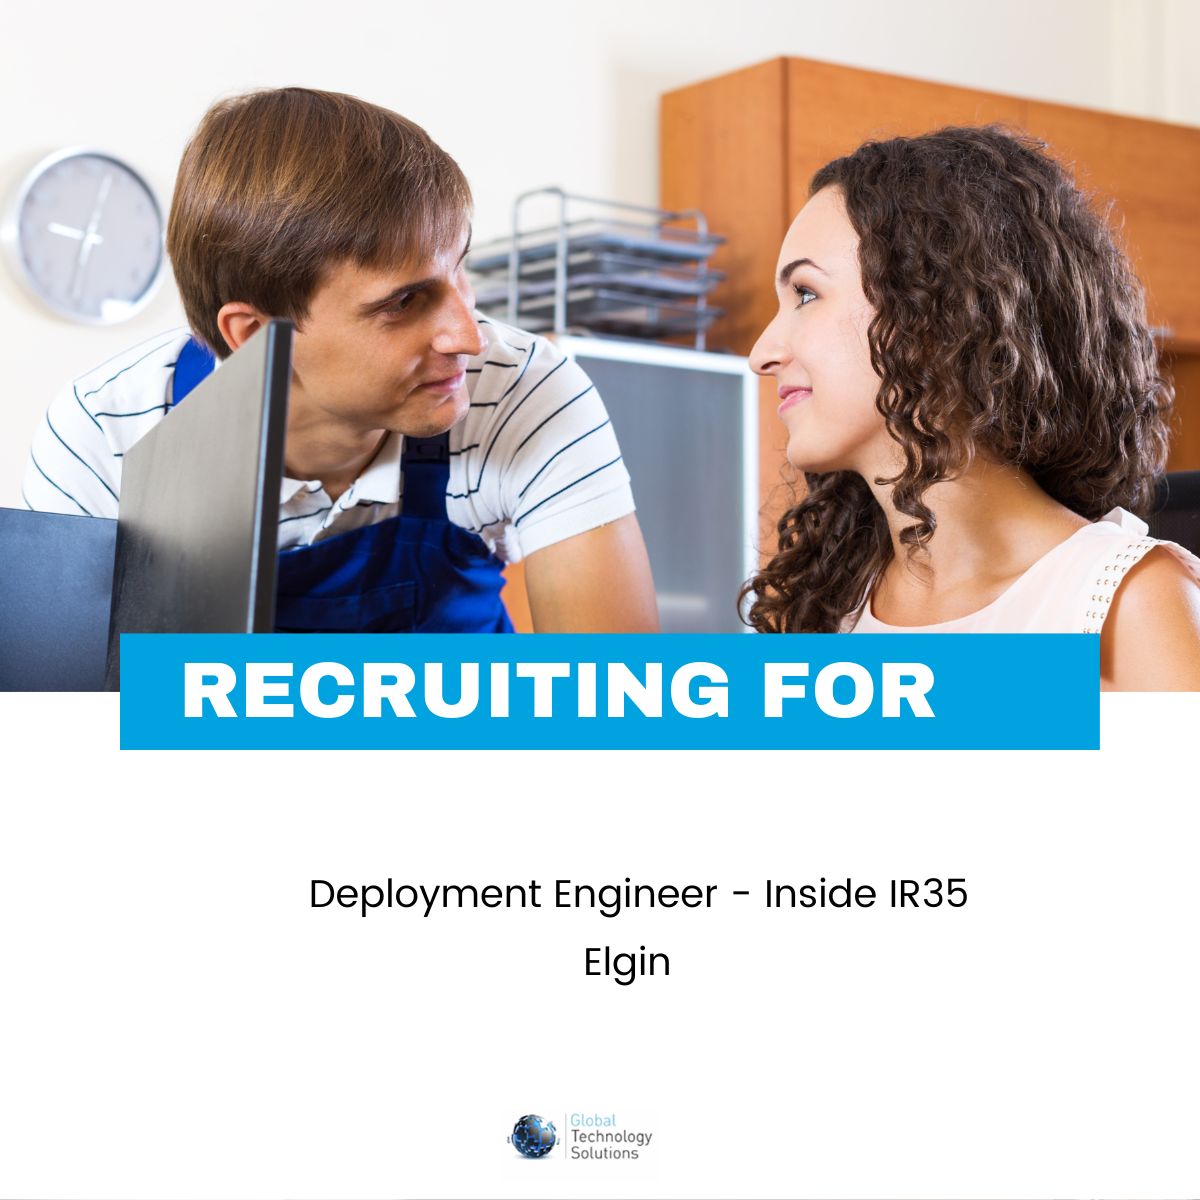 GTS has a new Job in Elgin, a Deployment Engineer role.